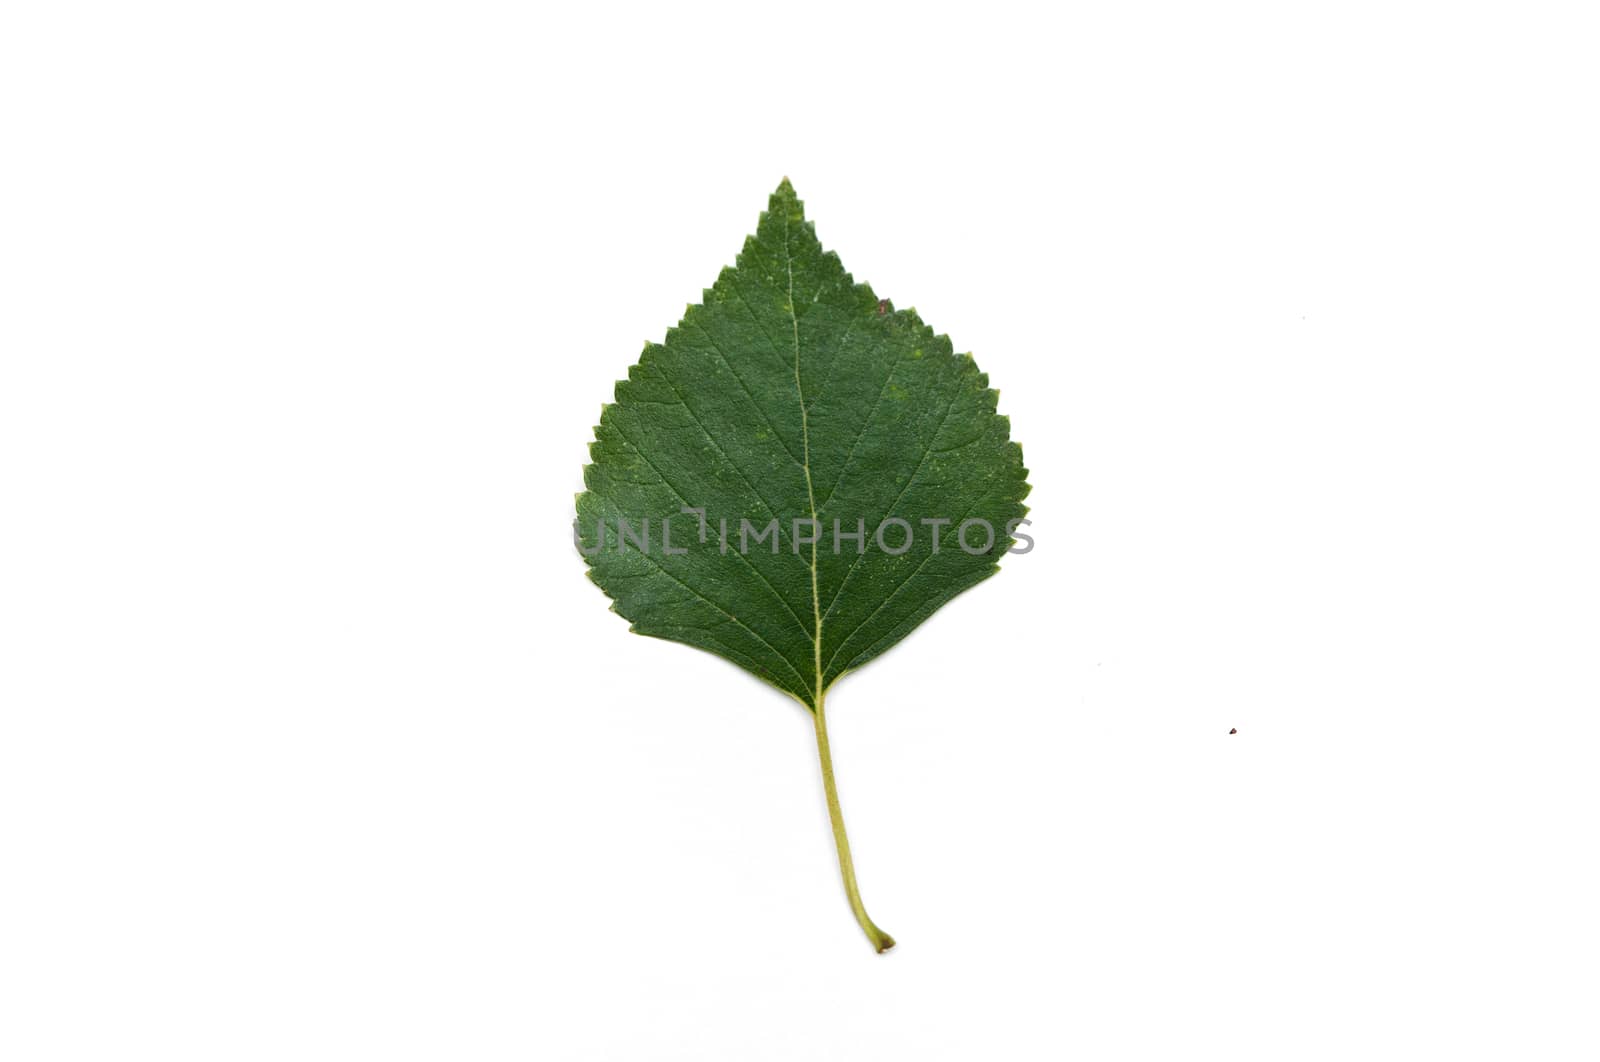 Isolated leaf of birch by NeydtStock